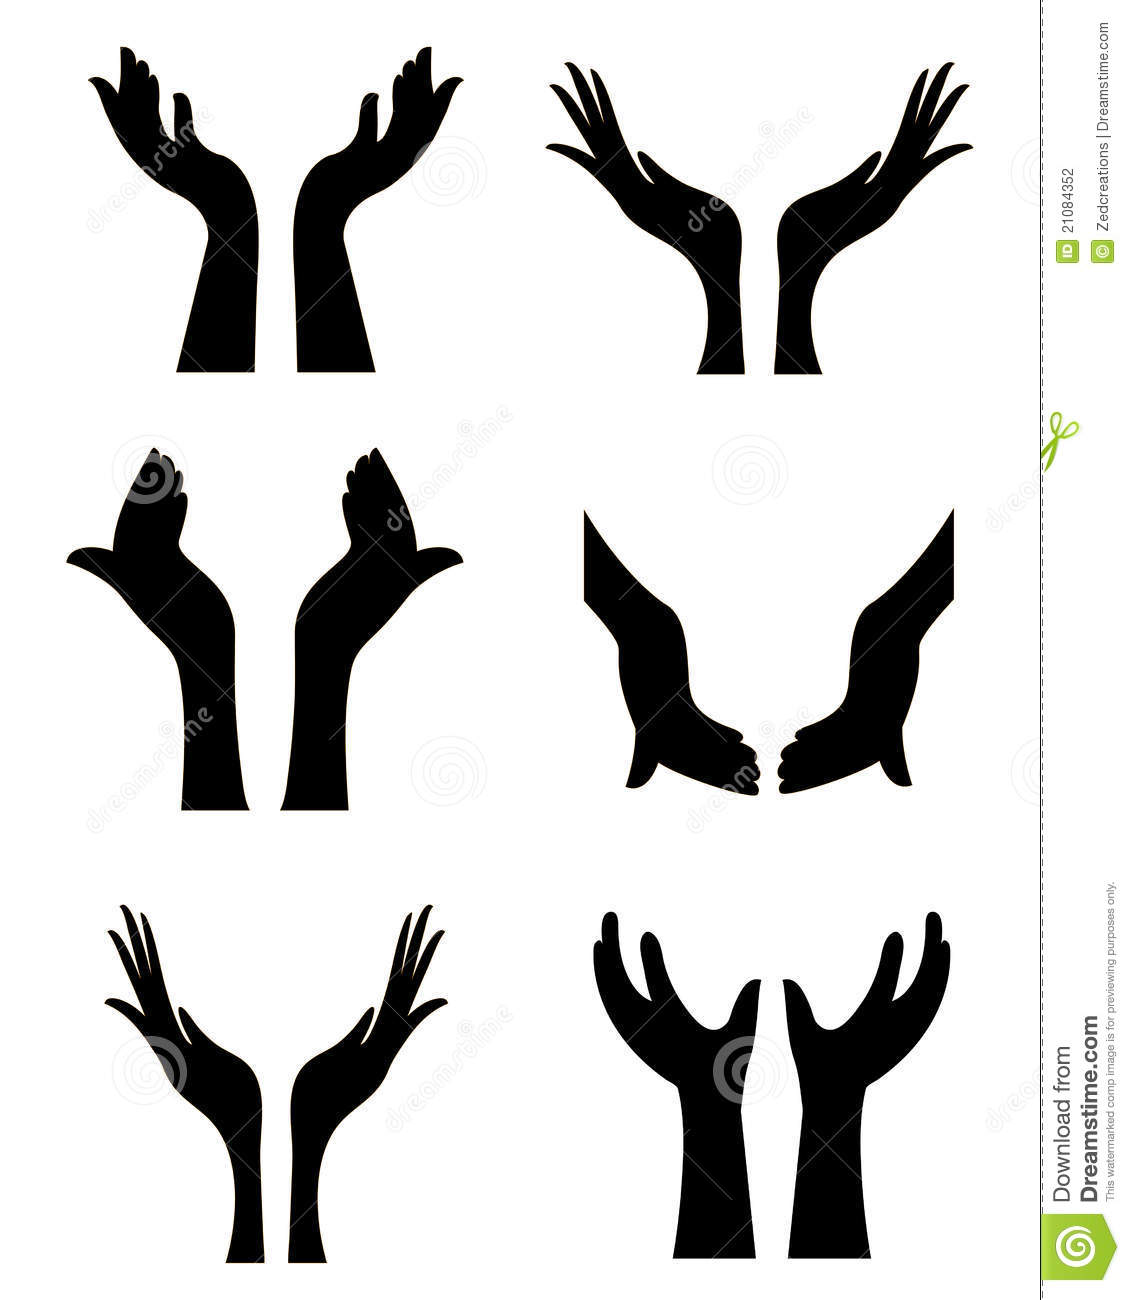 Reaching Hand Silhouette | Clipart library - Free Clipart Images